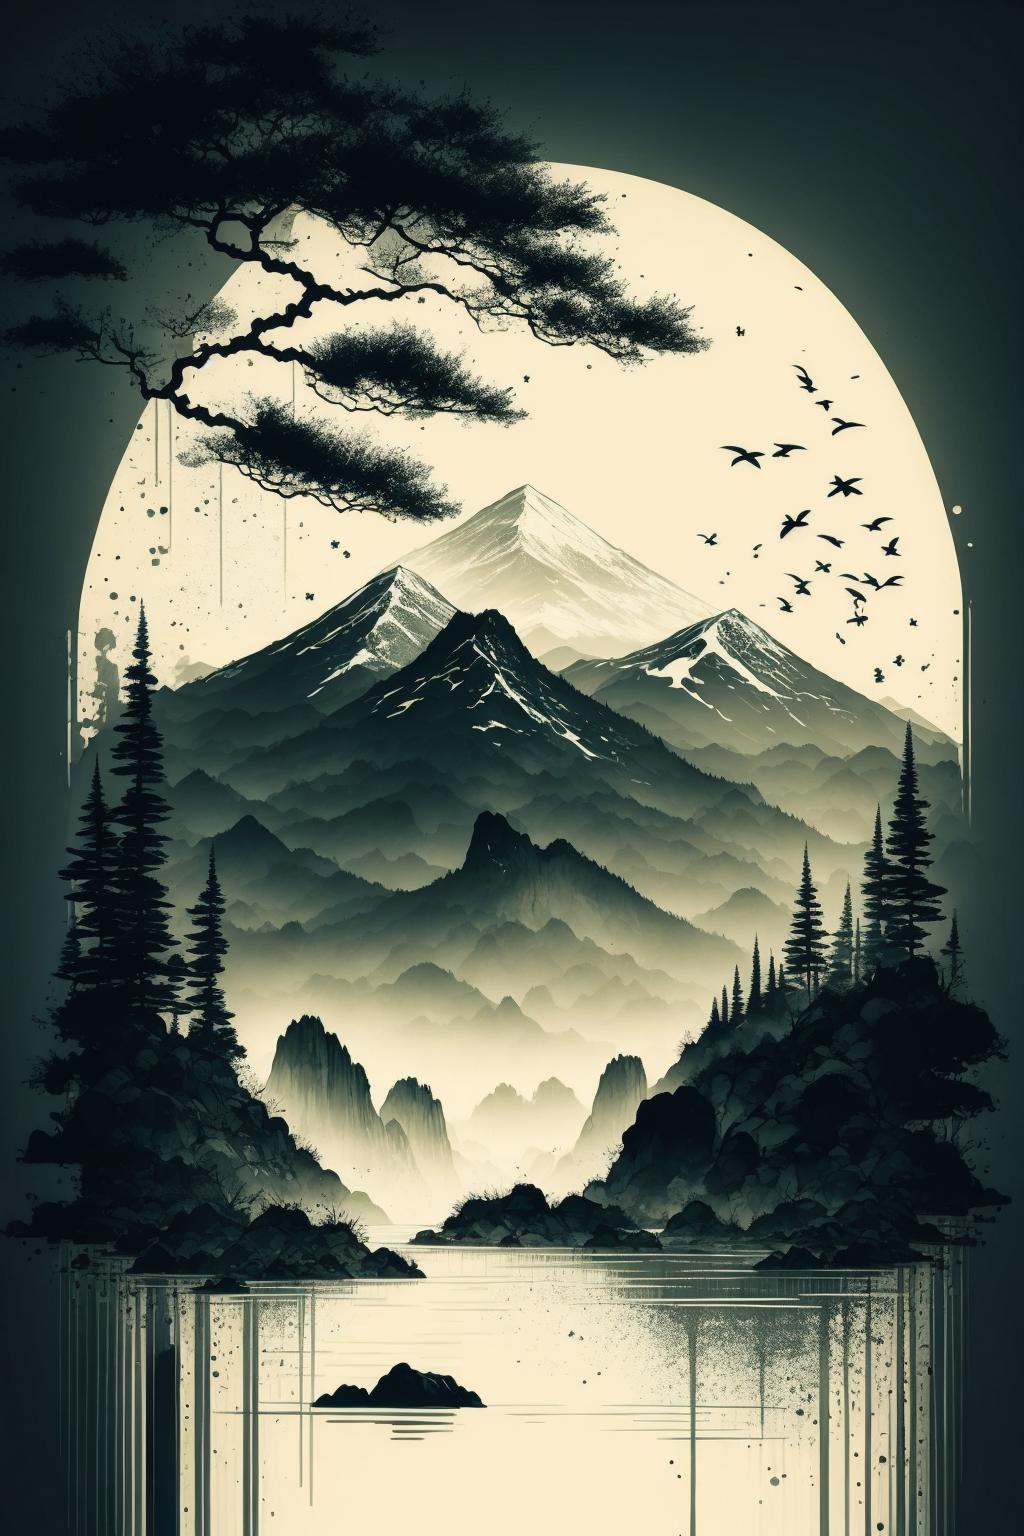 The Silhouette of Mountains and Trees with a Moonlit Sky and Flock of Birds